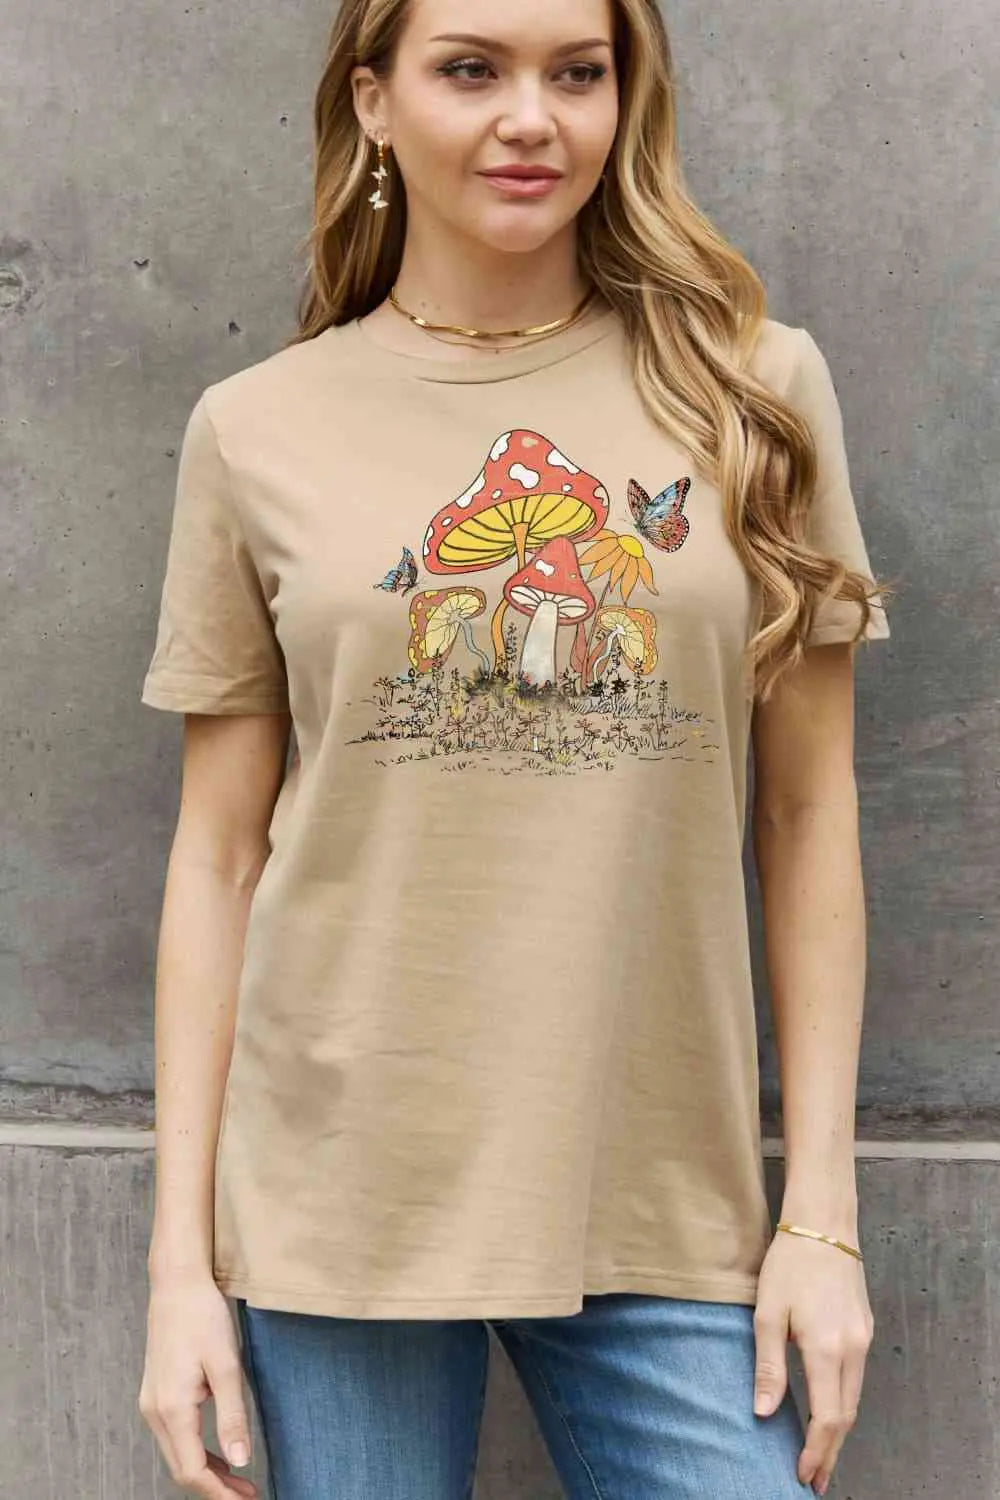 Simply Love Full Size Mushroom & Butterfly Graphic Cotton T-Shirt - Image #1